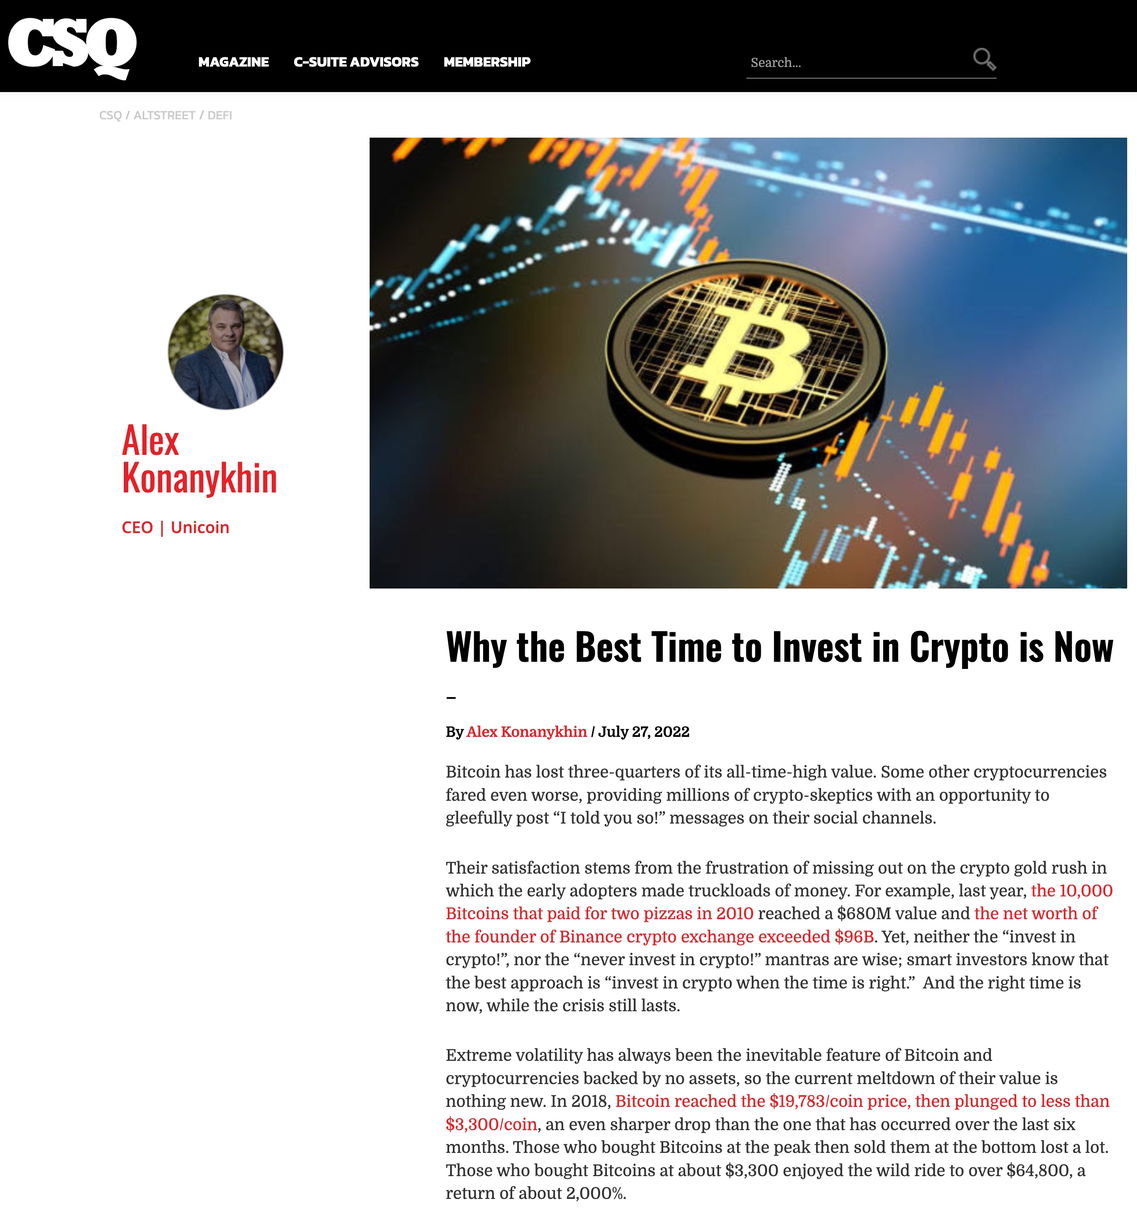 Why the Best Time to Invest in Crypto is Now